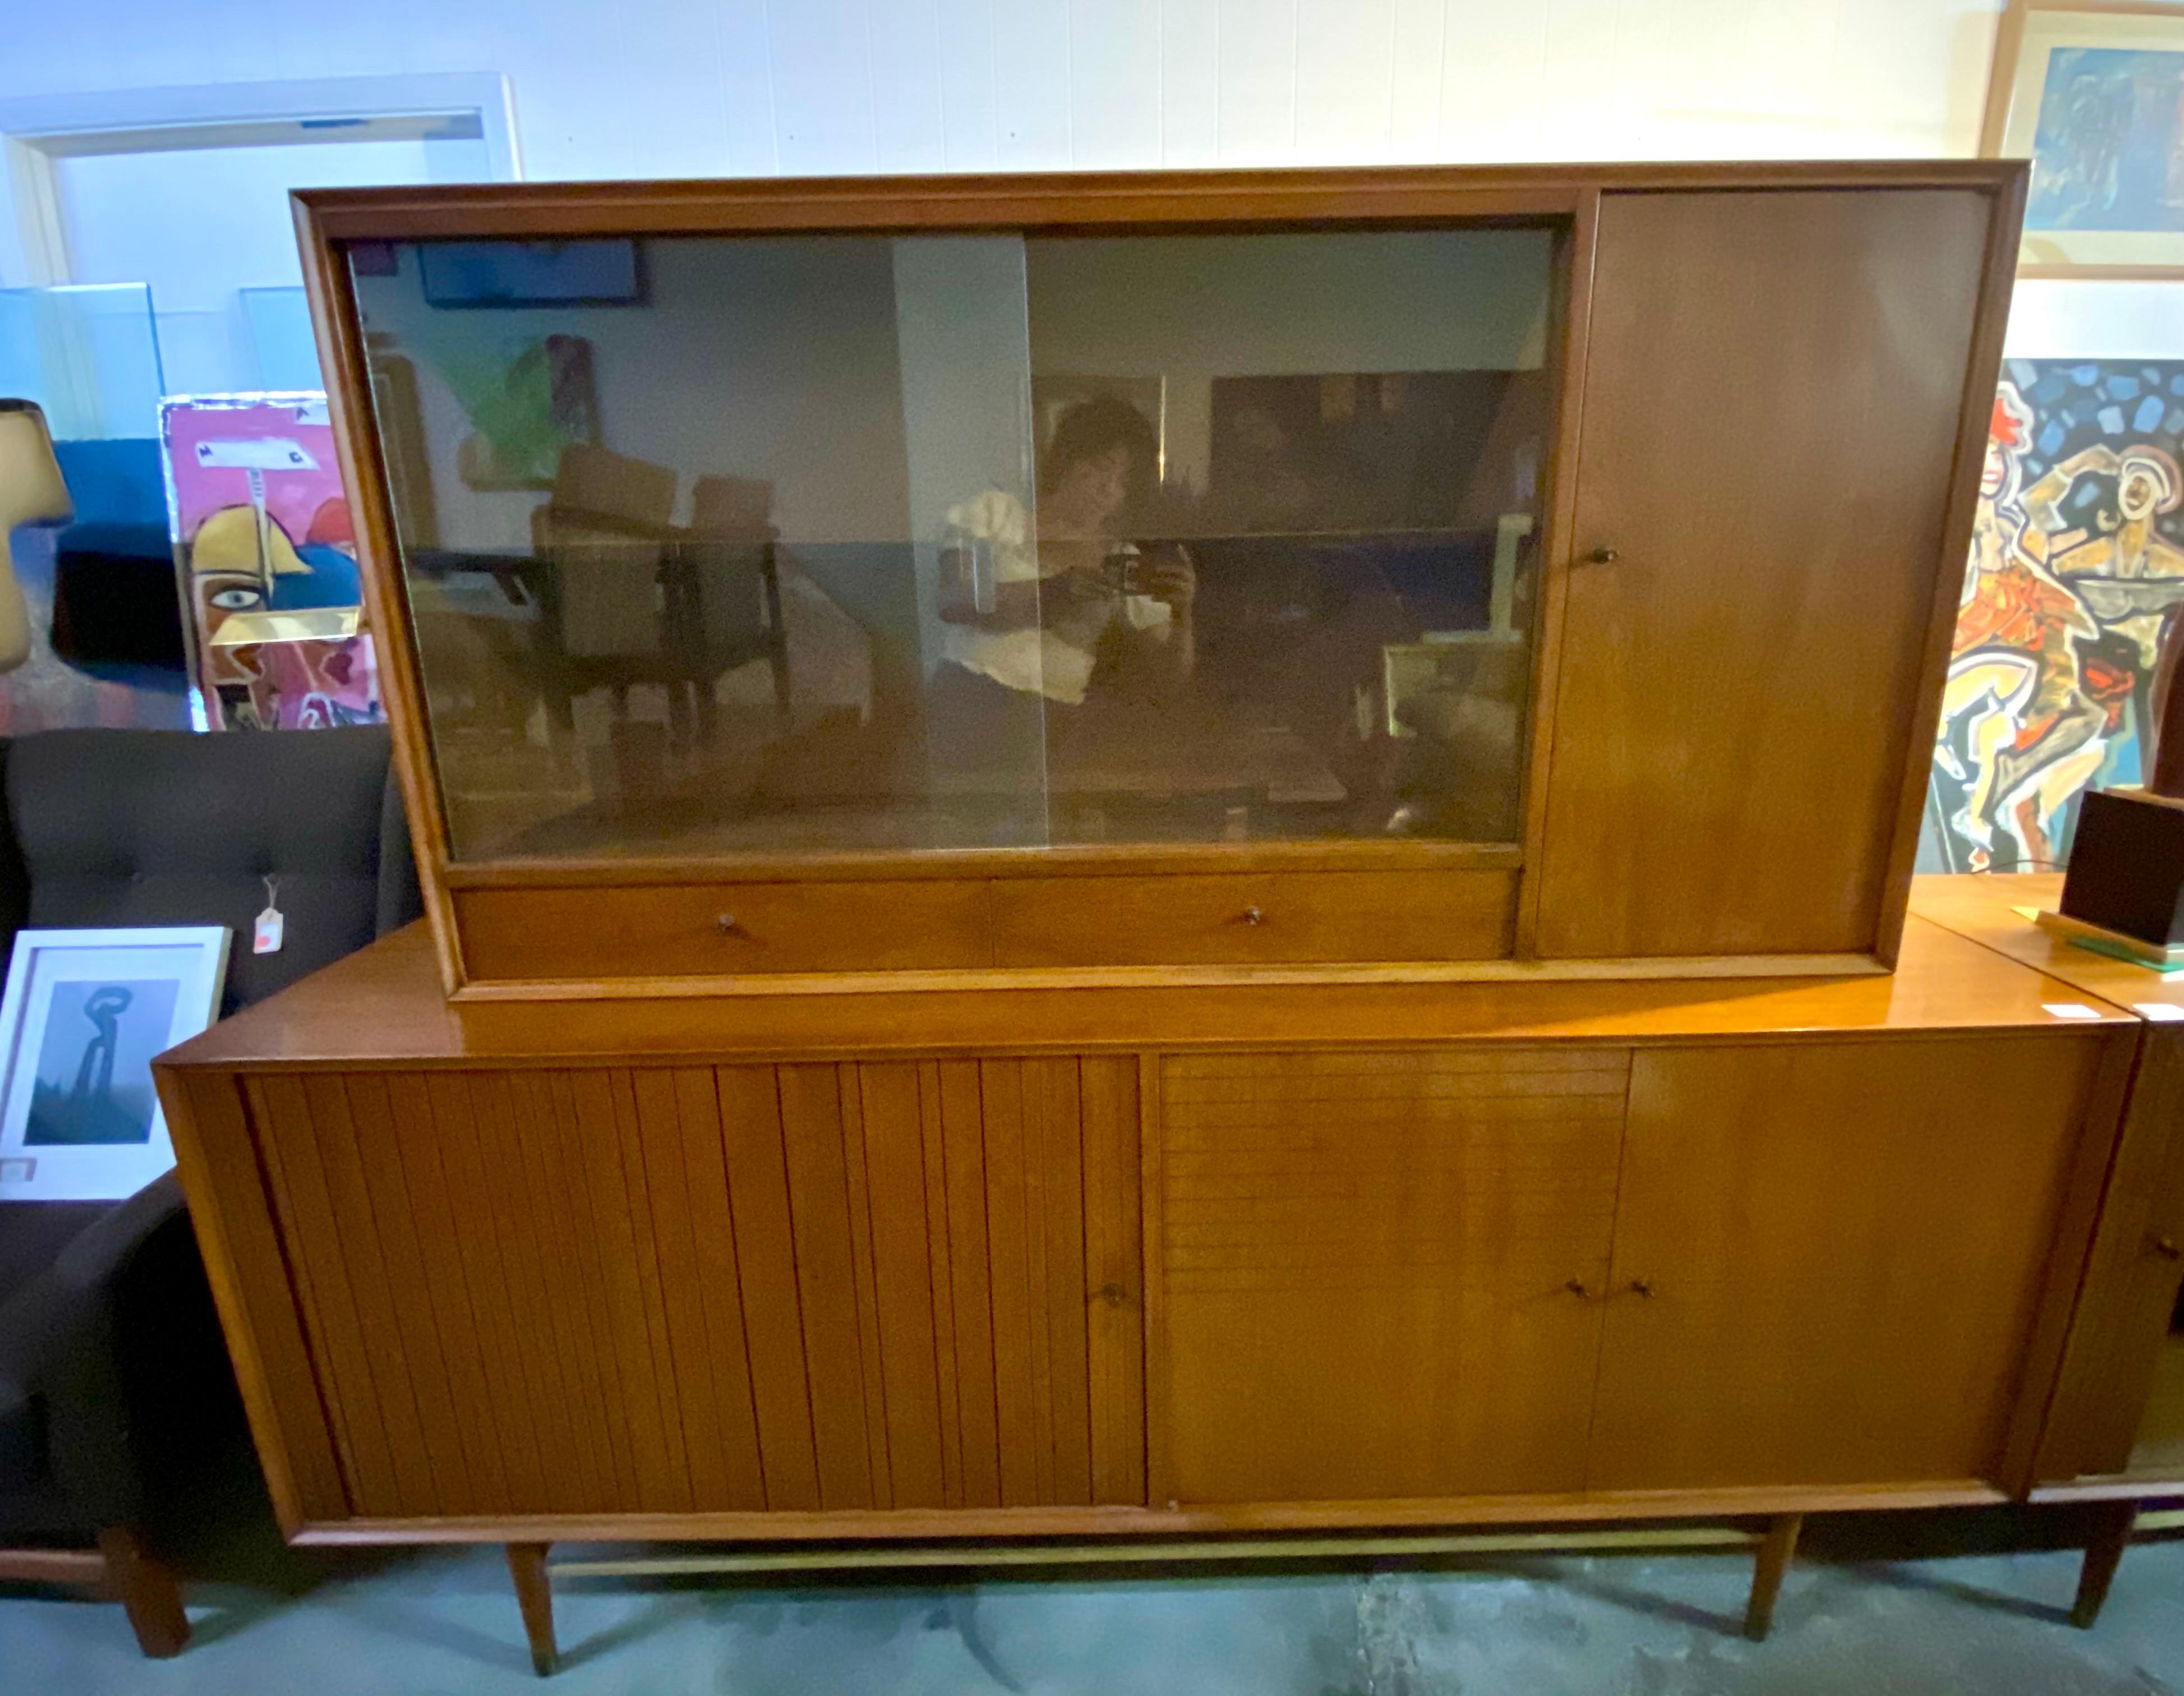 Vintage walnut credenza / sideboard by Foster-McDavid features a hutch and plenty of storage. The left side of credenza has a sliding tambour door with two shelves and the right side opens up to three shelves. The Hutch features glass sliding doors